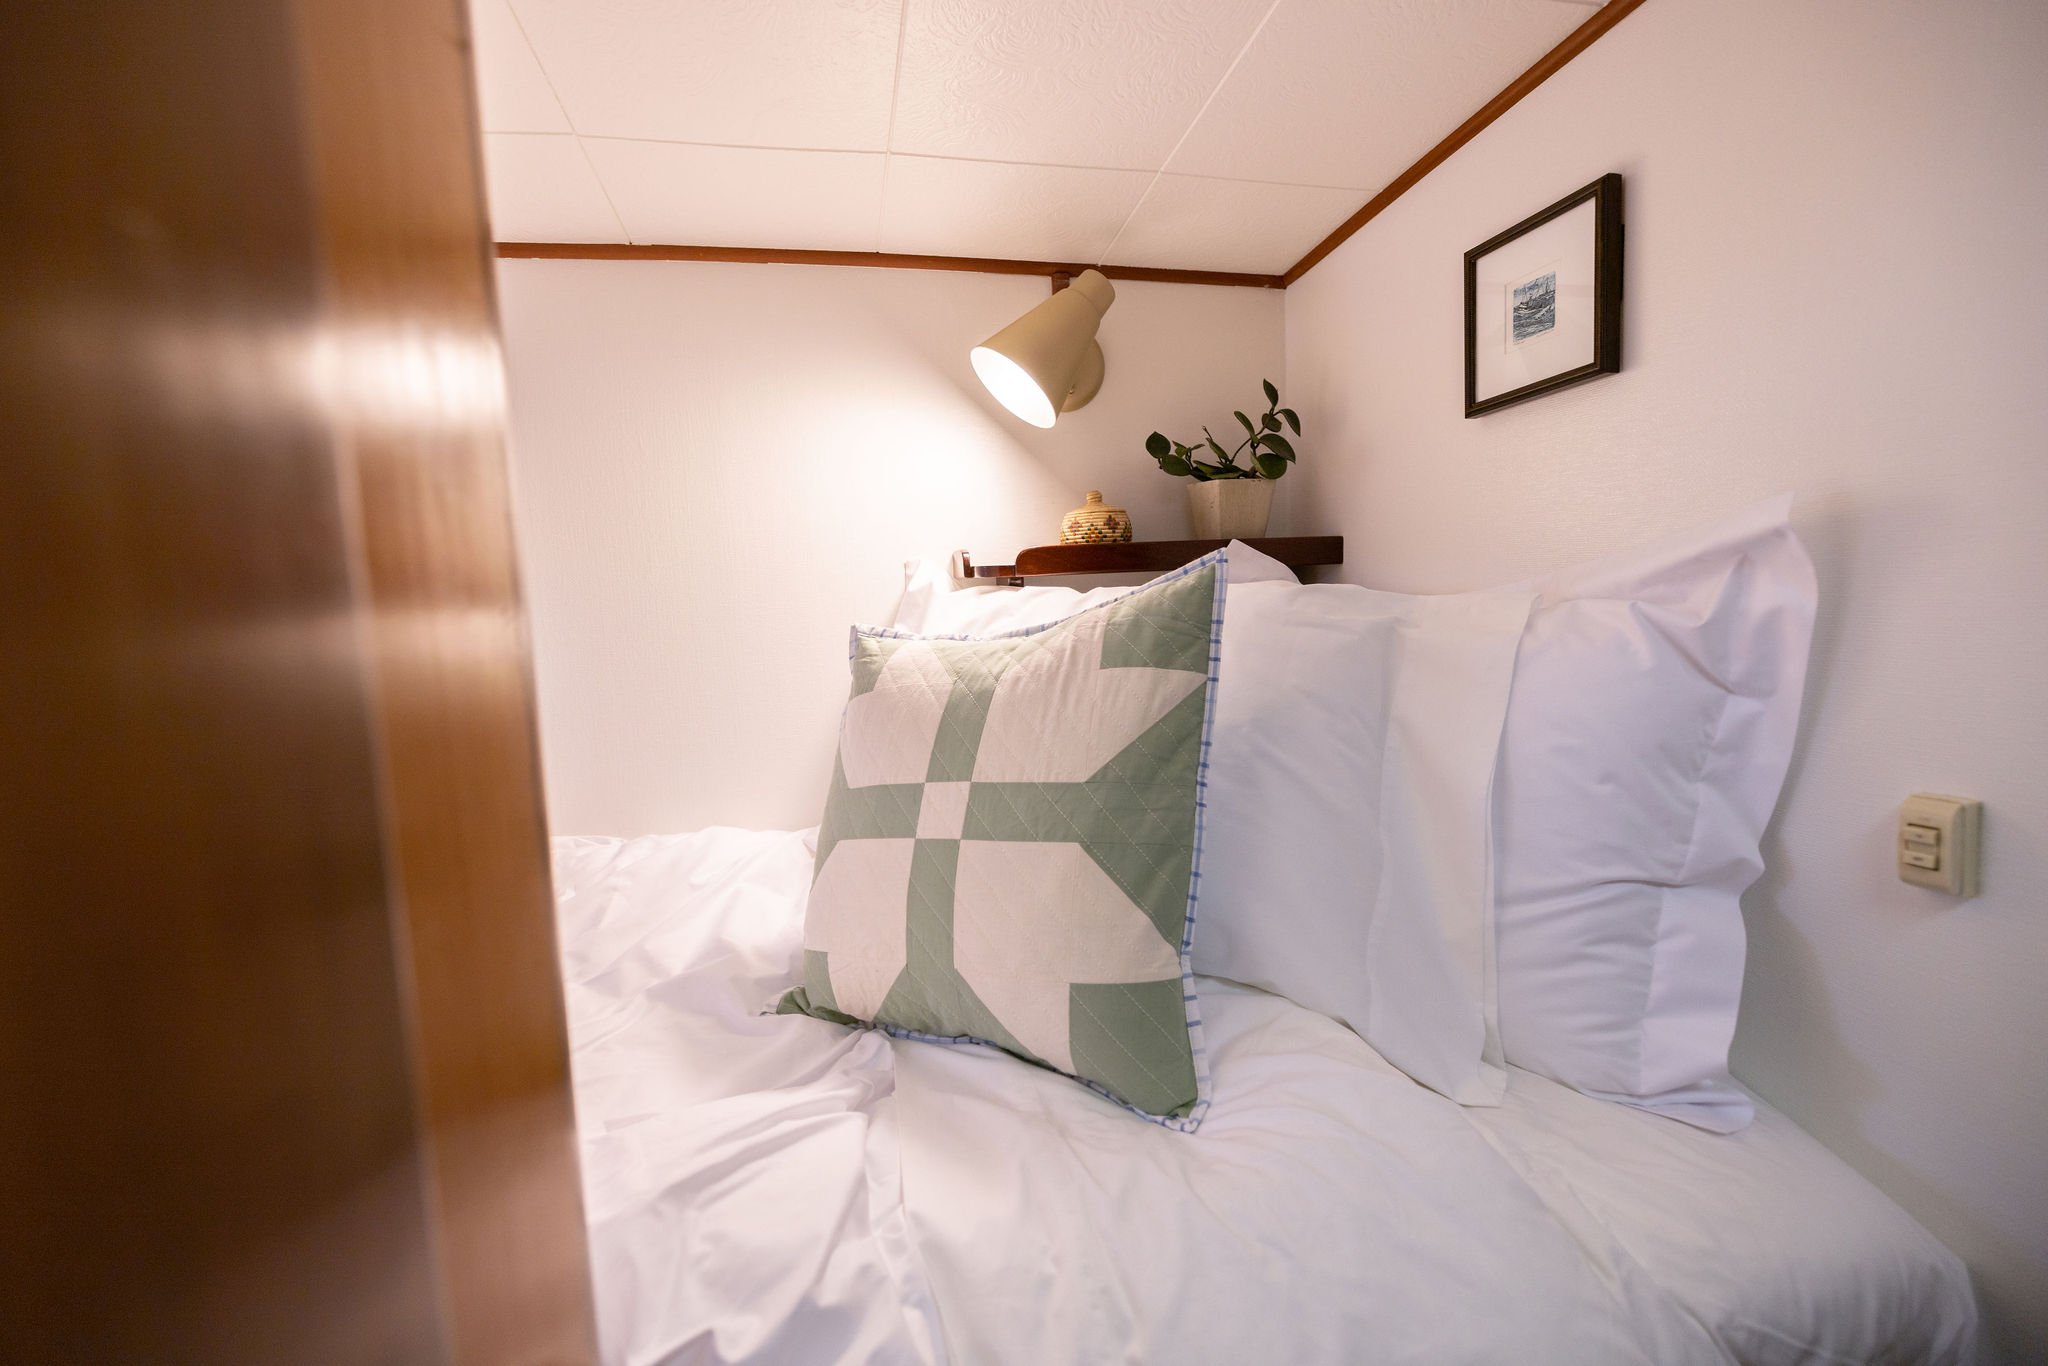 One bunk in the Bunkroom with pillows, linens and light.